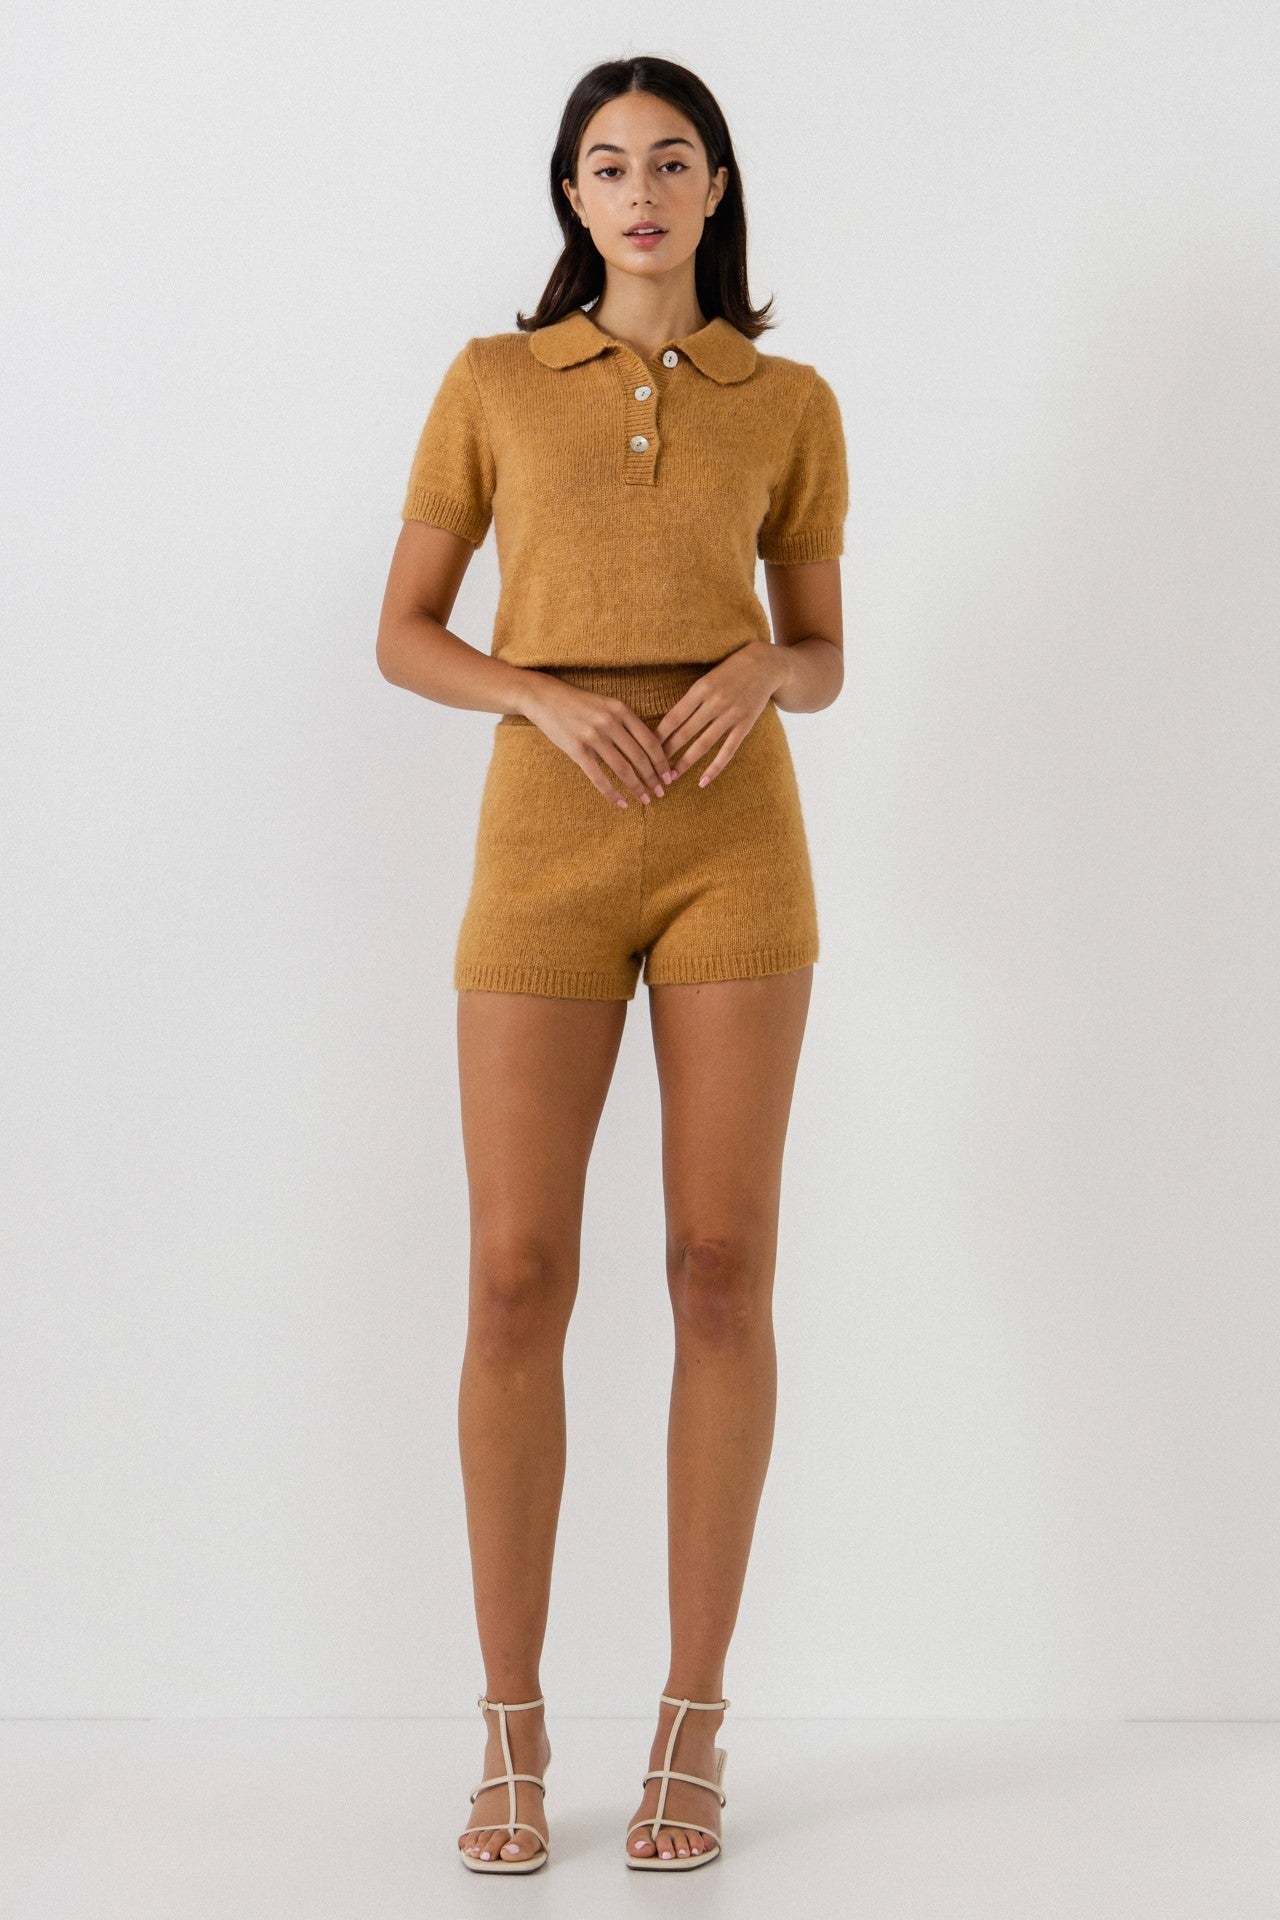 UNIKONCEPT Lifestyle Boutique and Lounge; Model wearing Cozy Chalet Romper in gold by English Factory - a knit romper with short sleeves and polo button collar